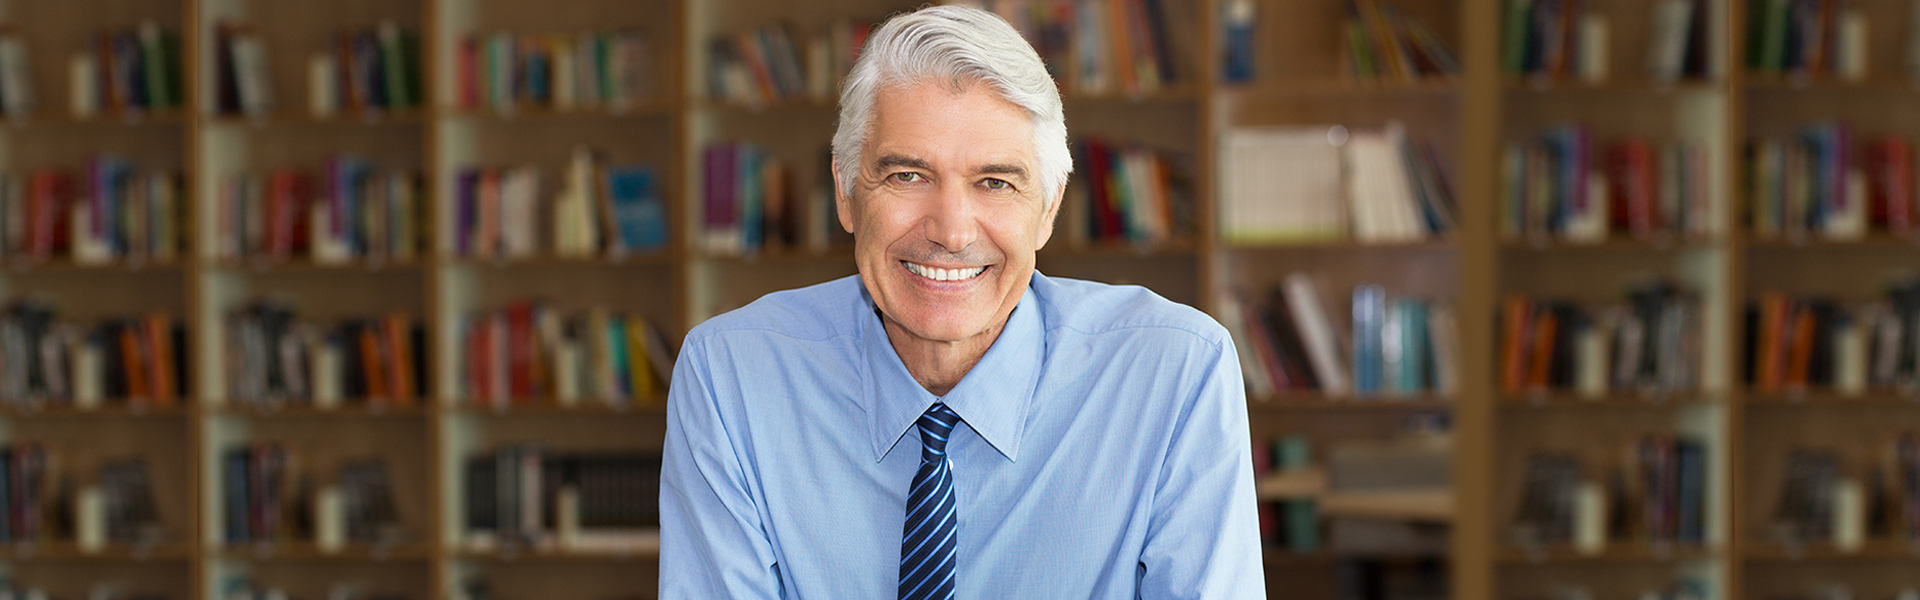 Partial Dentures or Full Dentures: What is the Best Option for You?